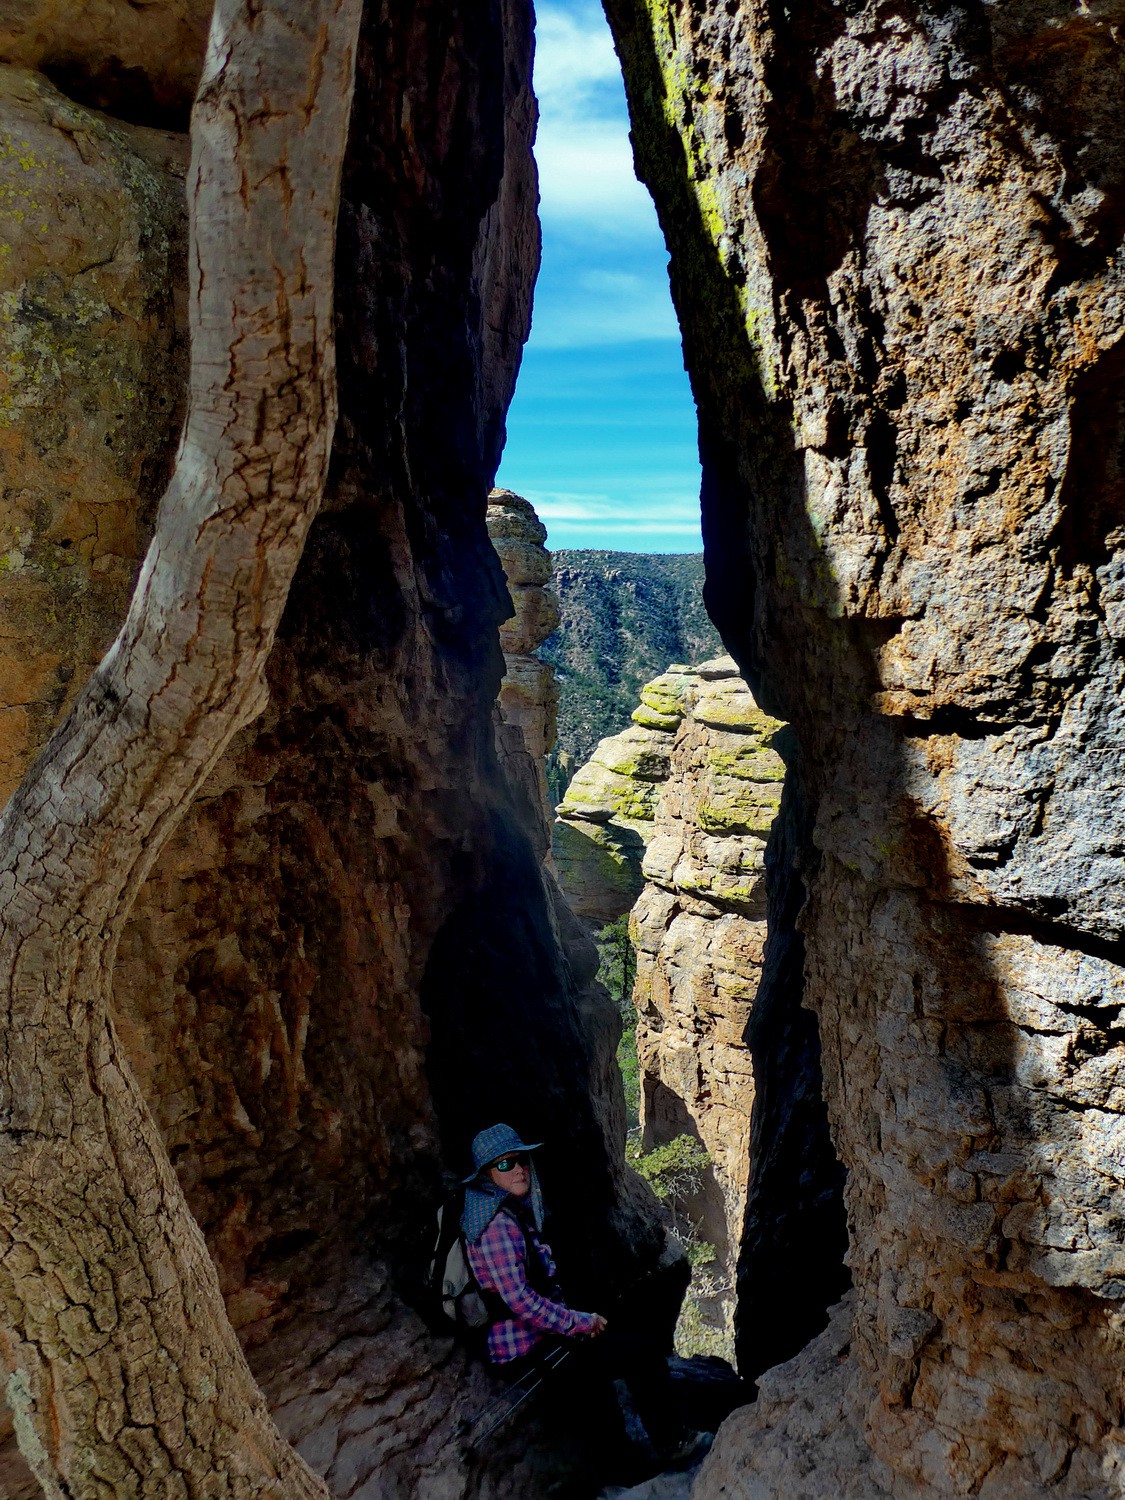 Marion in a gap of the Echo Canyon in the Chiricahua National Monument